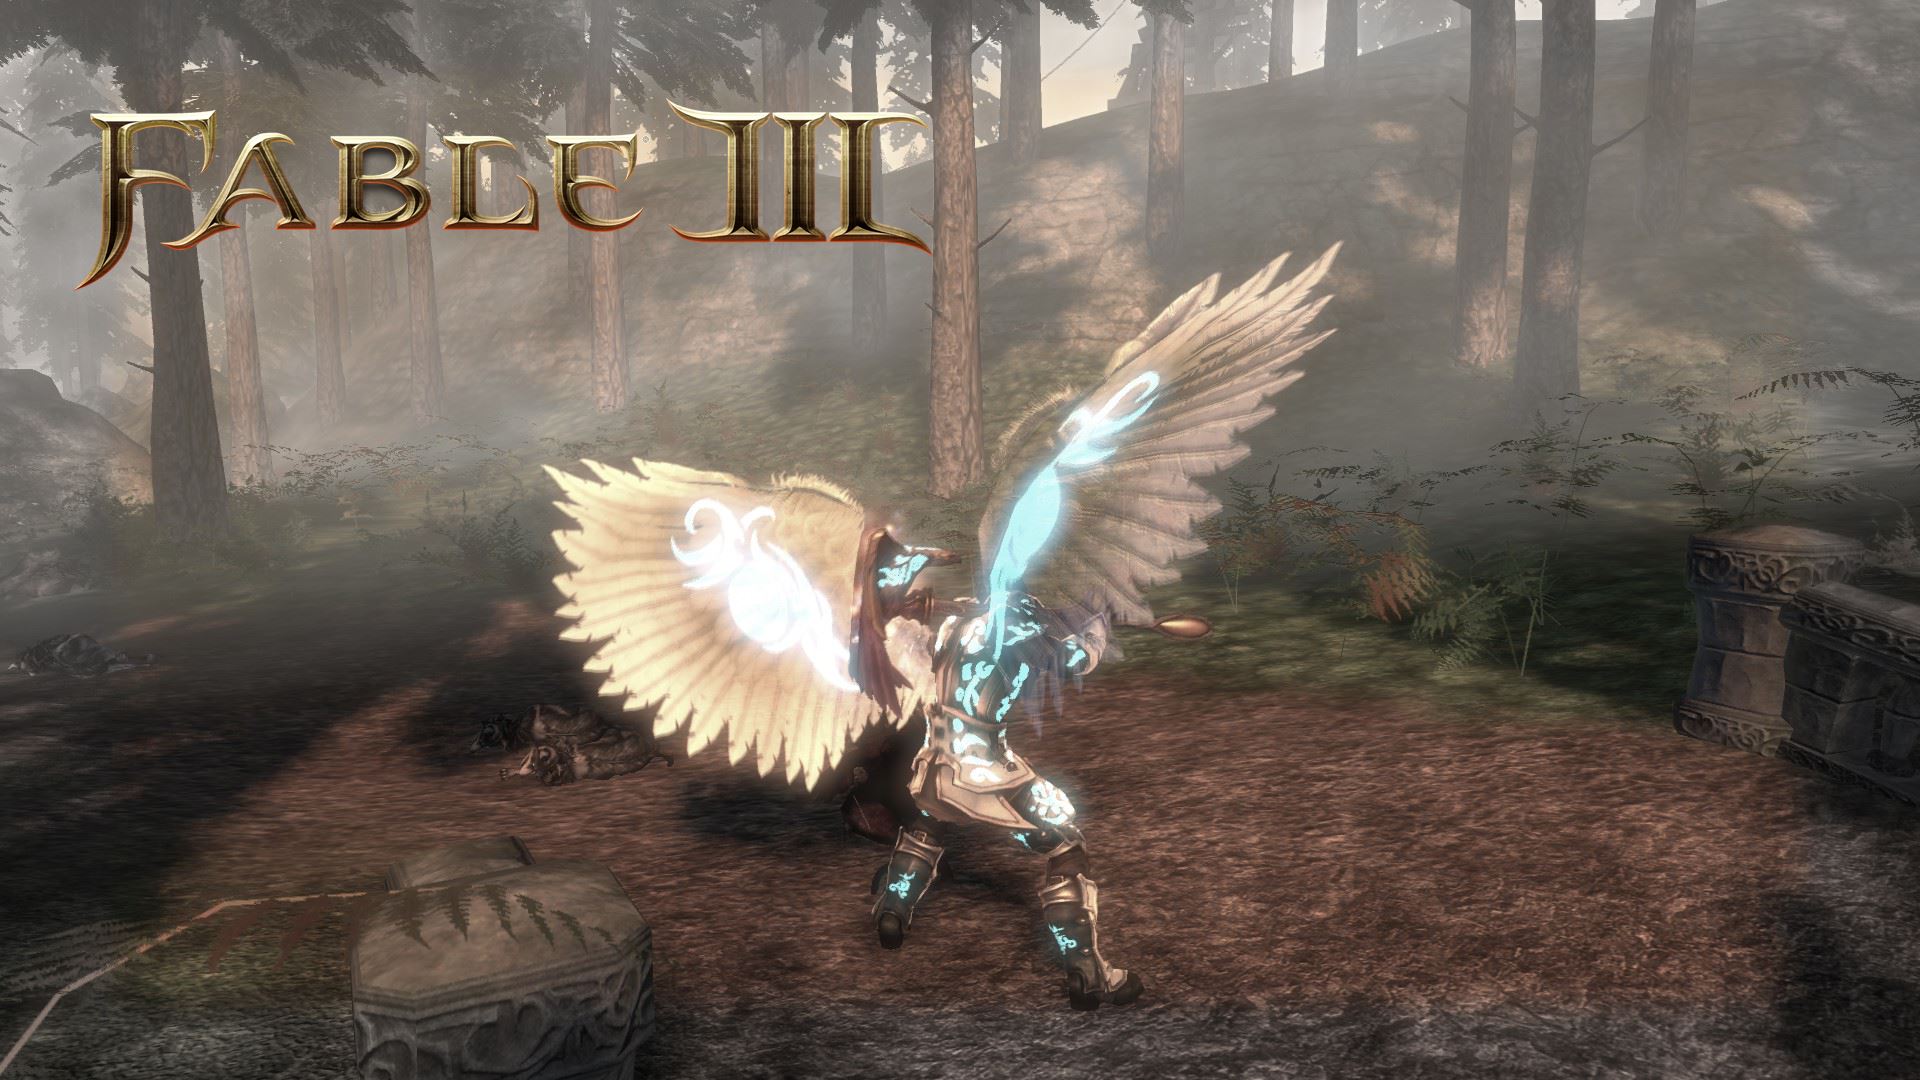 fable iii steam download